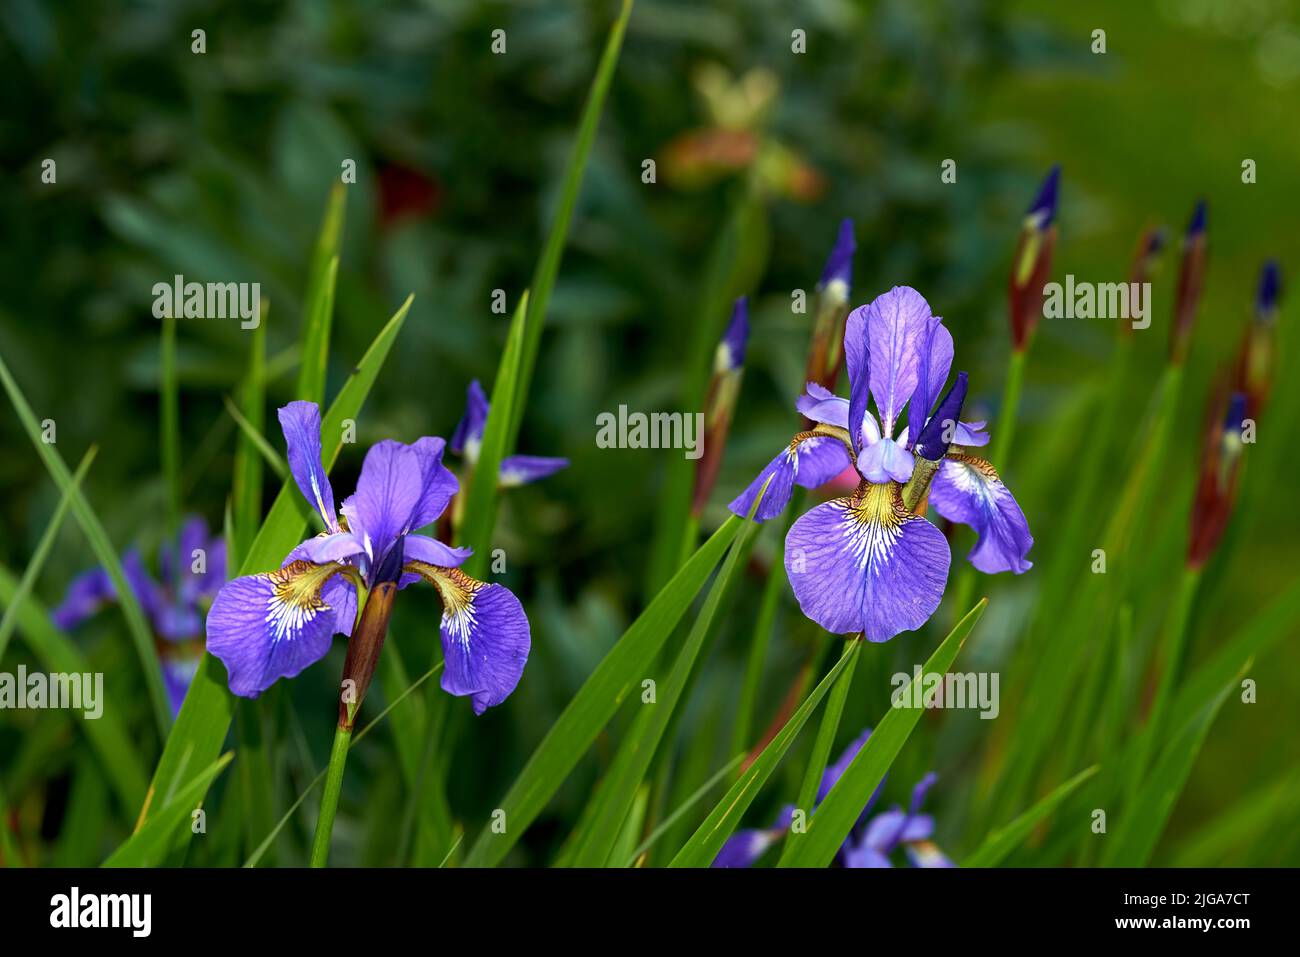 Closeup of blue iris sibirica growing on green stems or stalks against bokeh background in home garden. Two vibrant herbaceous perennials flowers Stock Photo